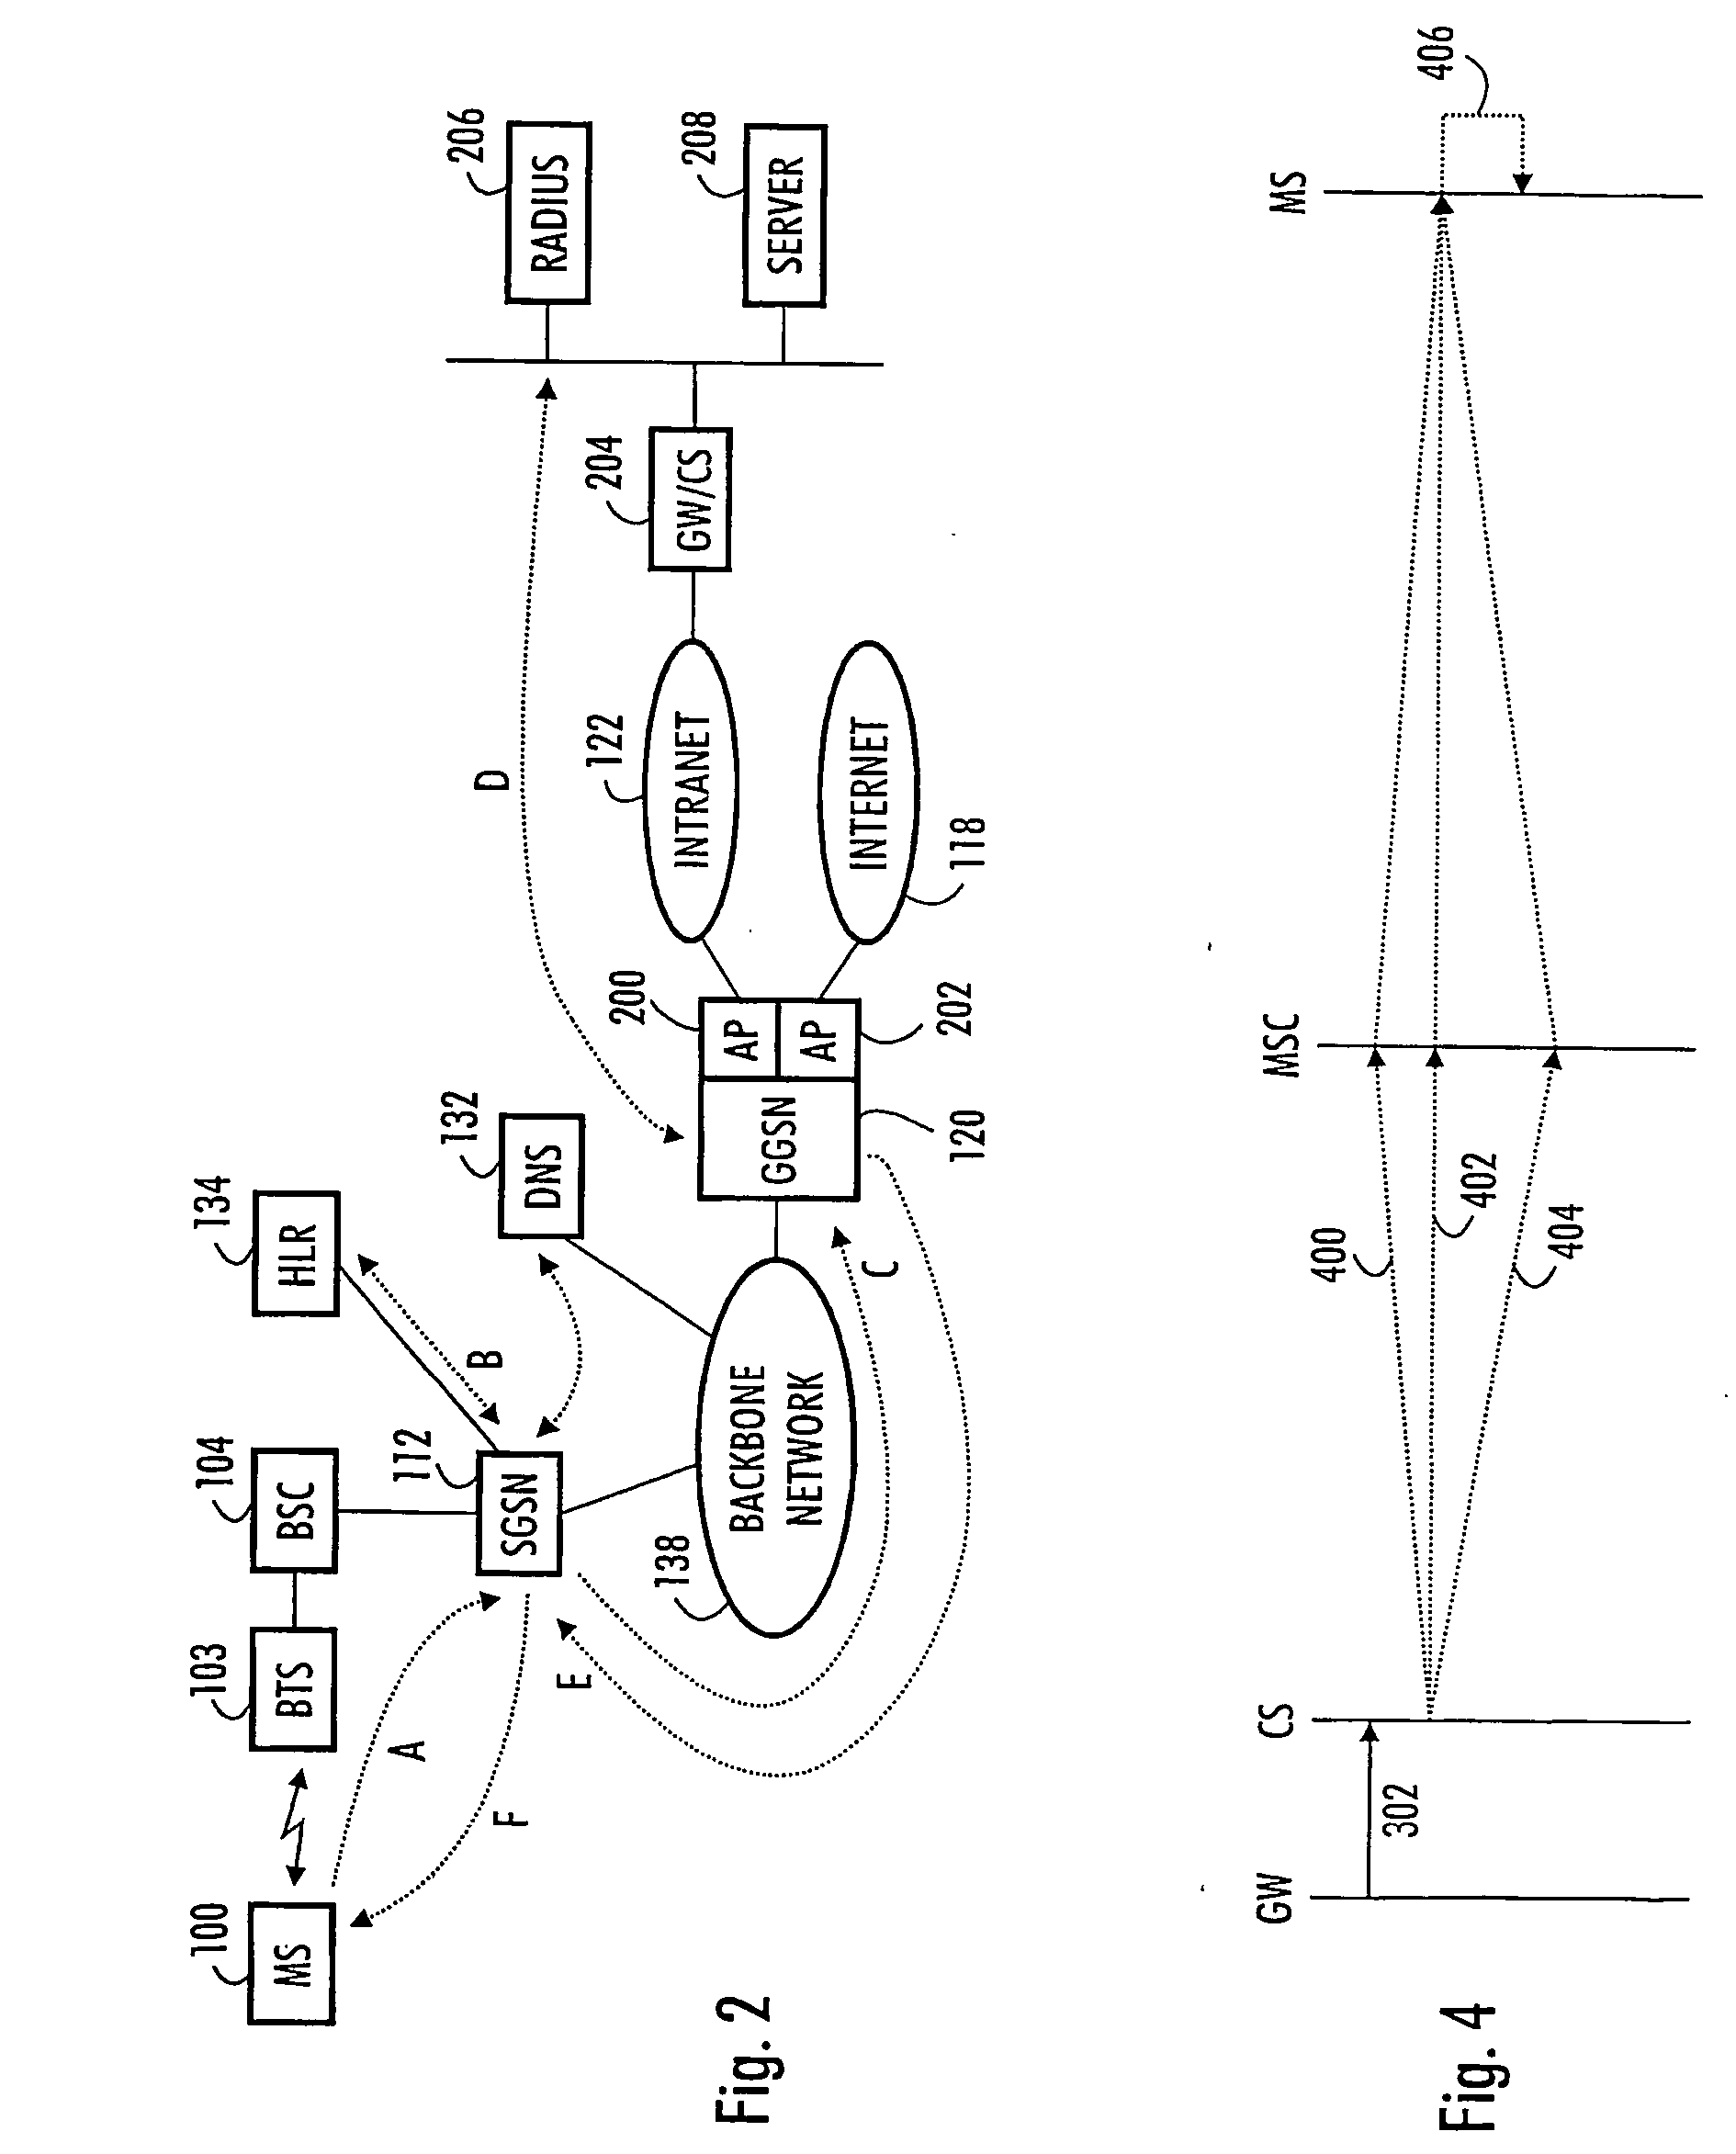 Data transmission method to a wireless device which does not have an active data connection to a network